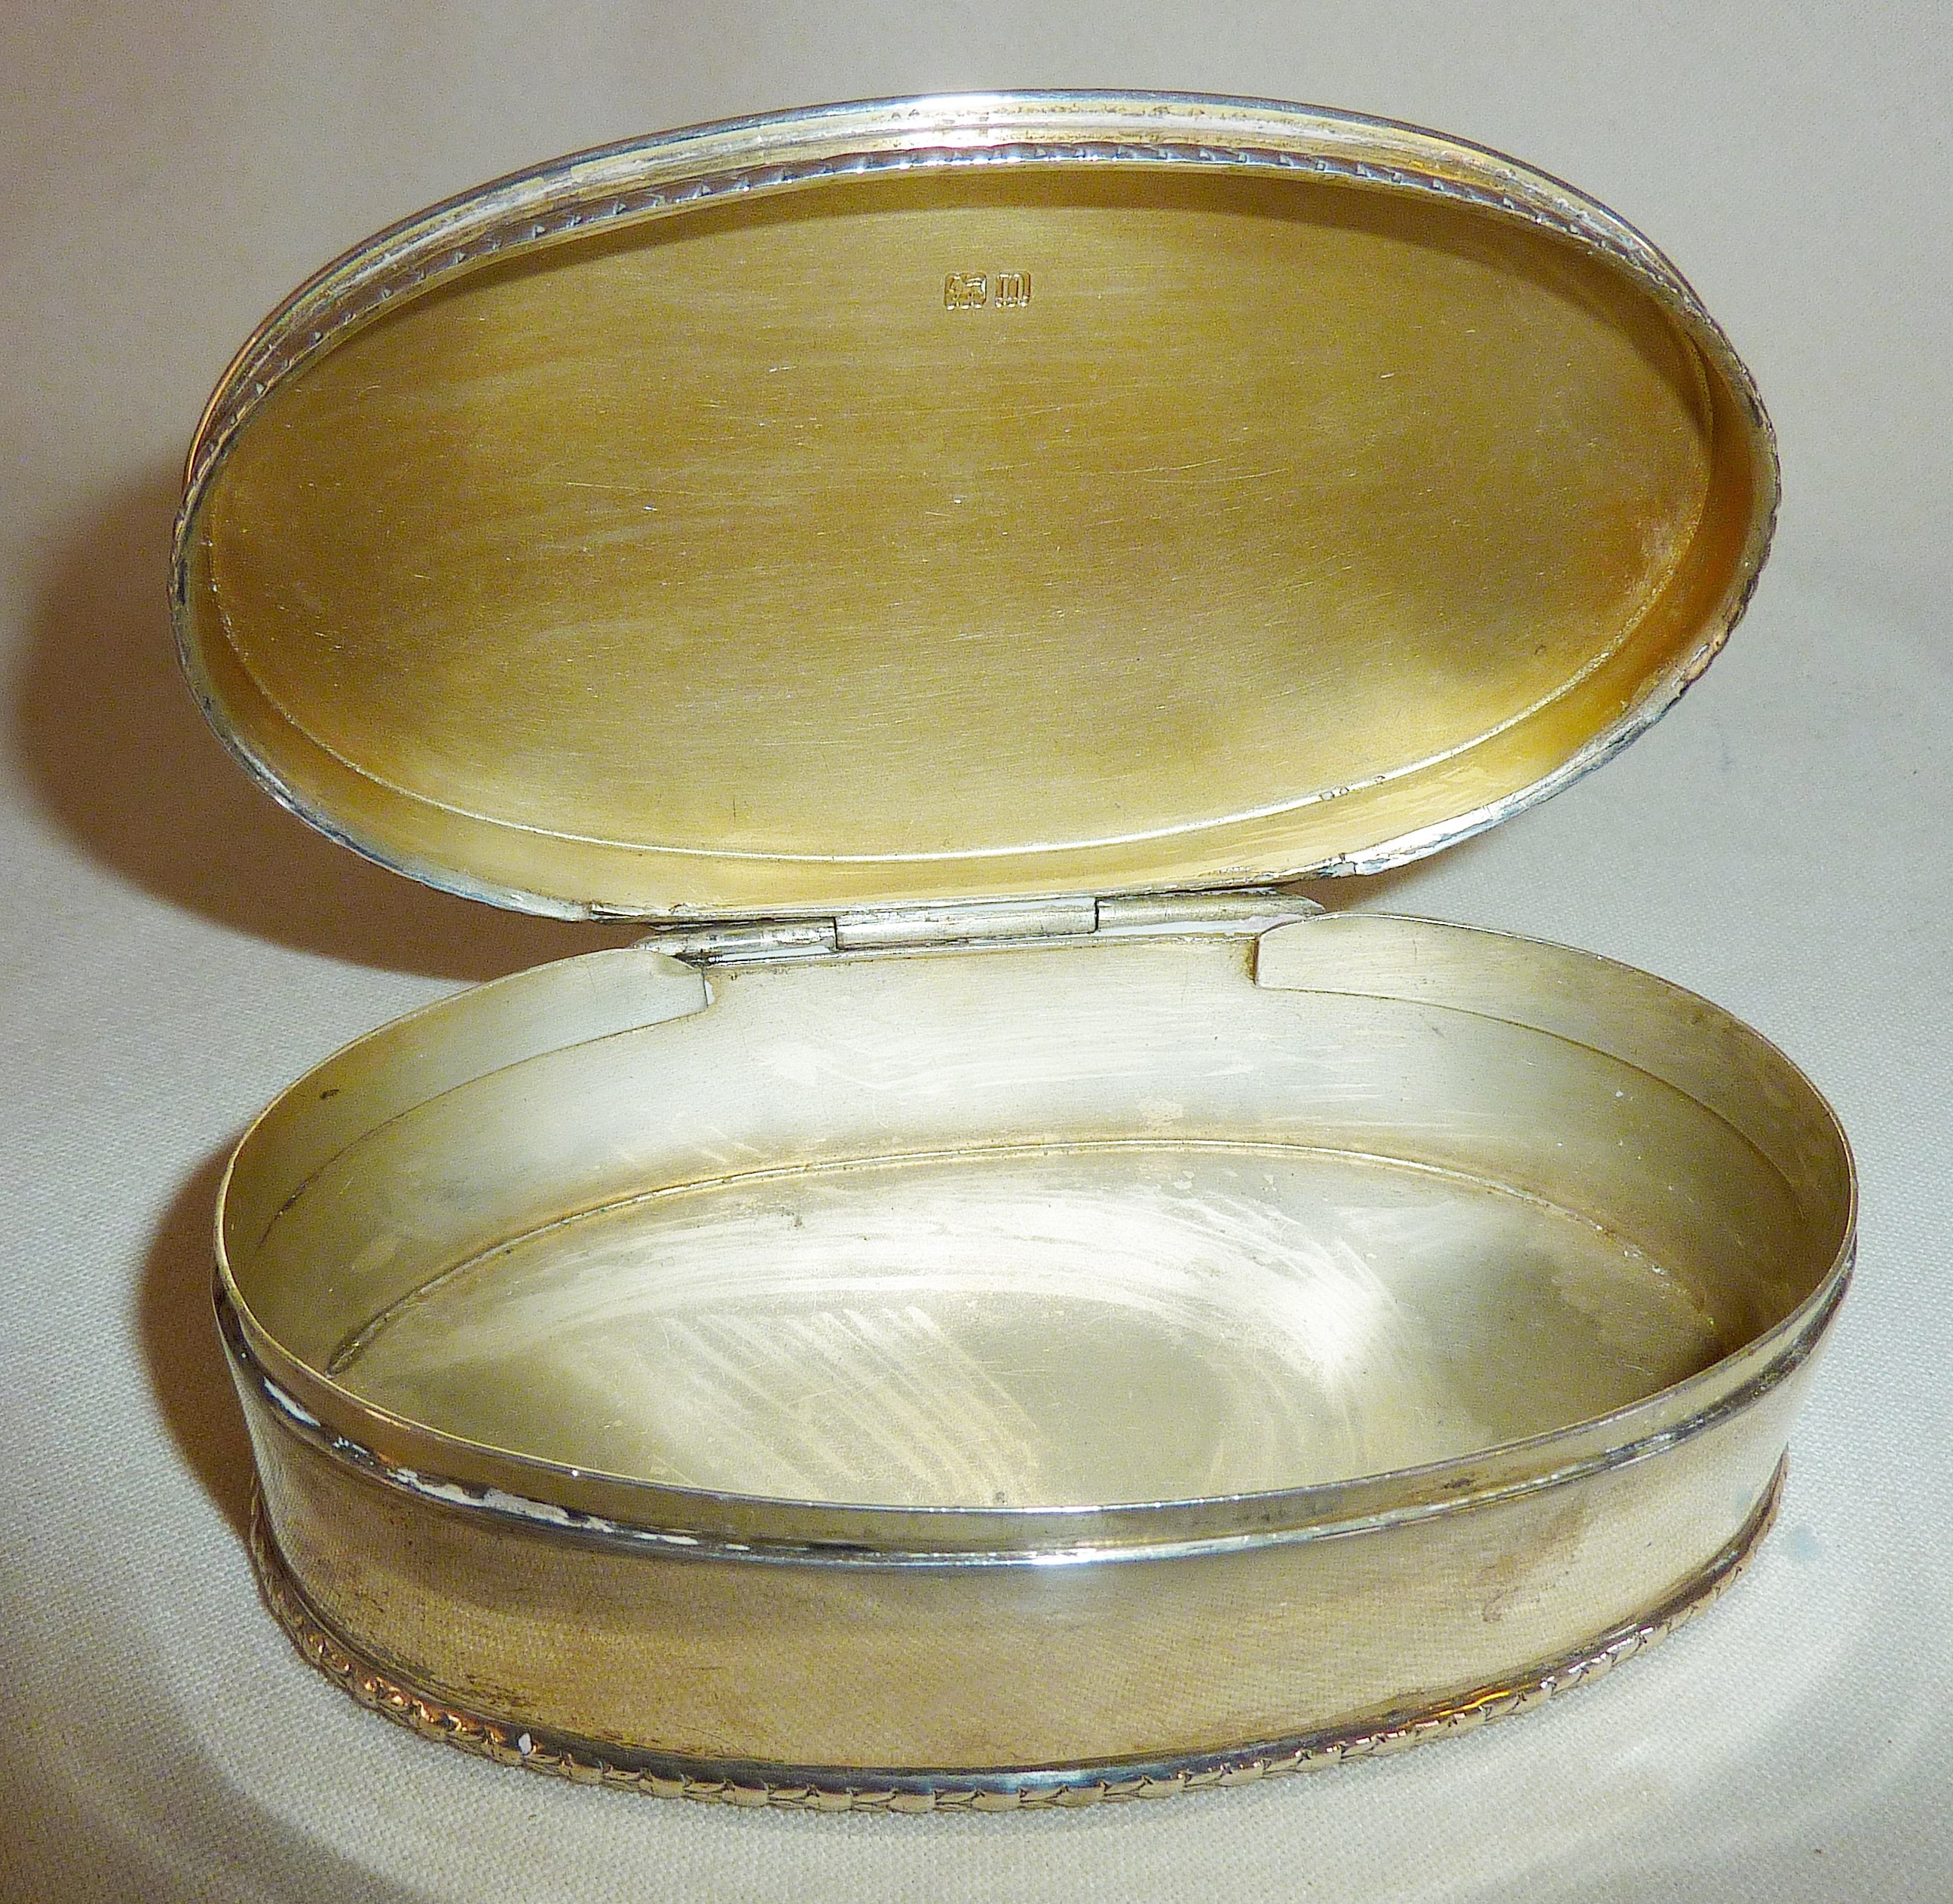 Antique silver oval table snuff box, hallmarked for London 1908, Goldsmiths & Silversmiths Co., - Image 2 of 2